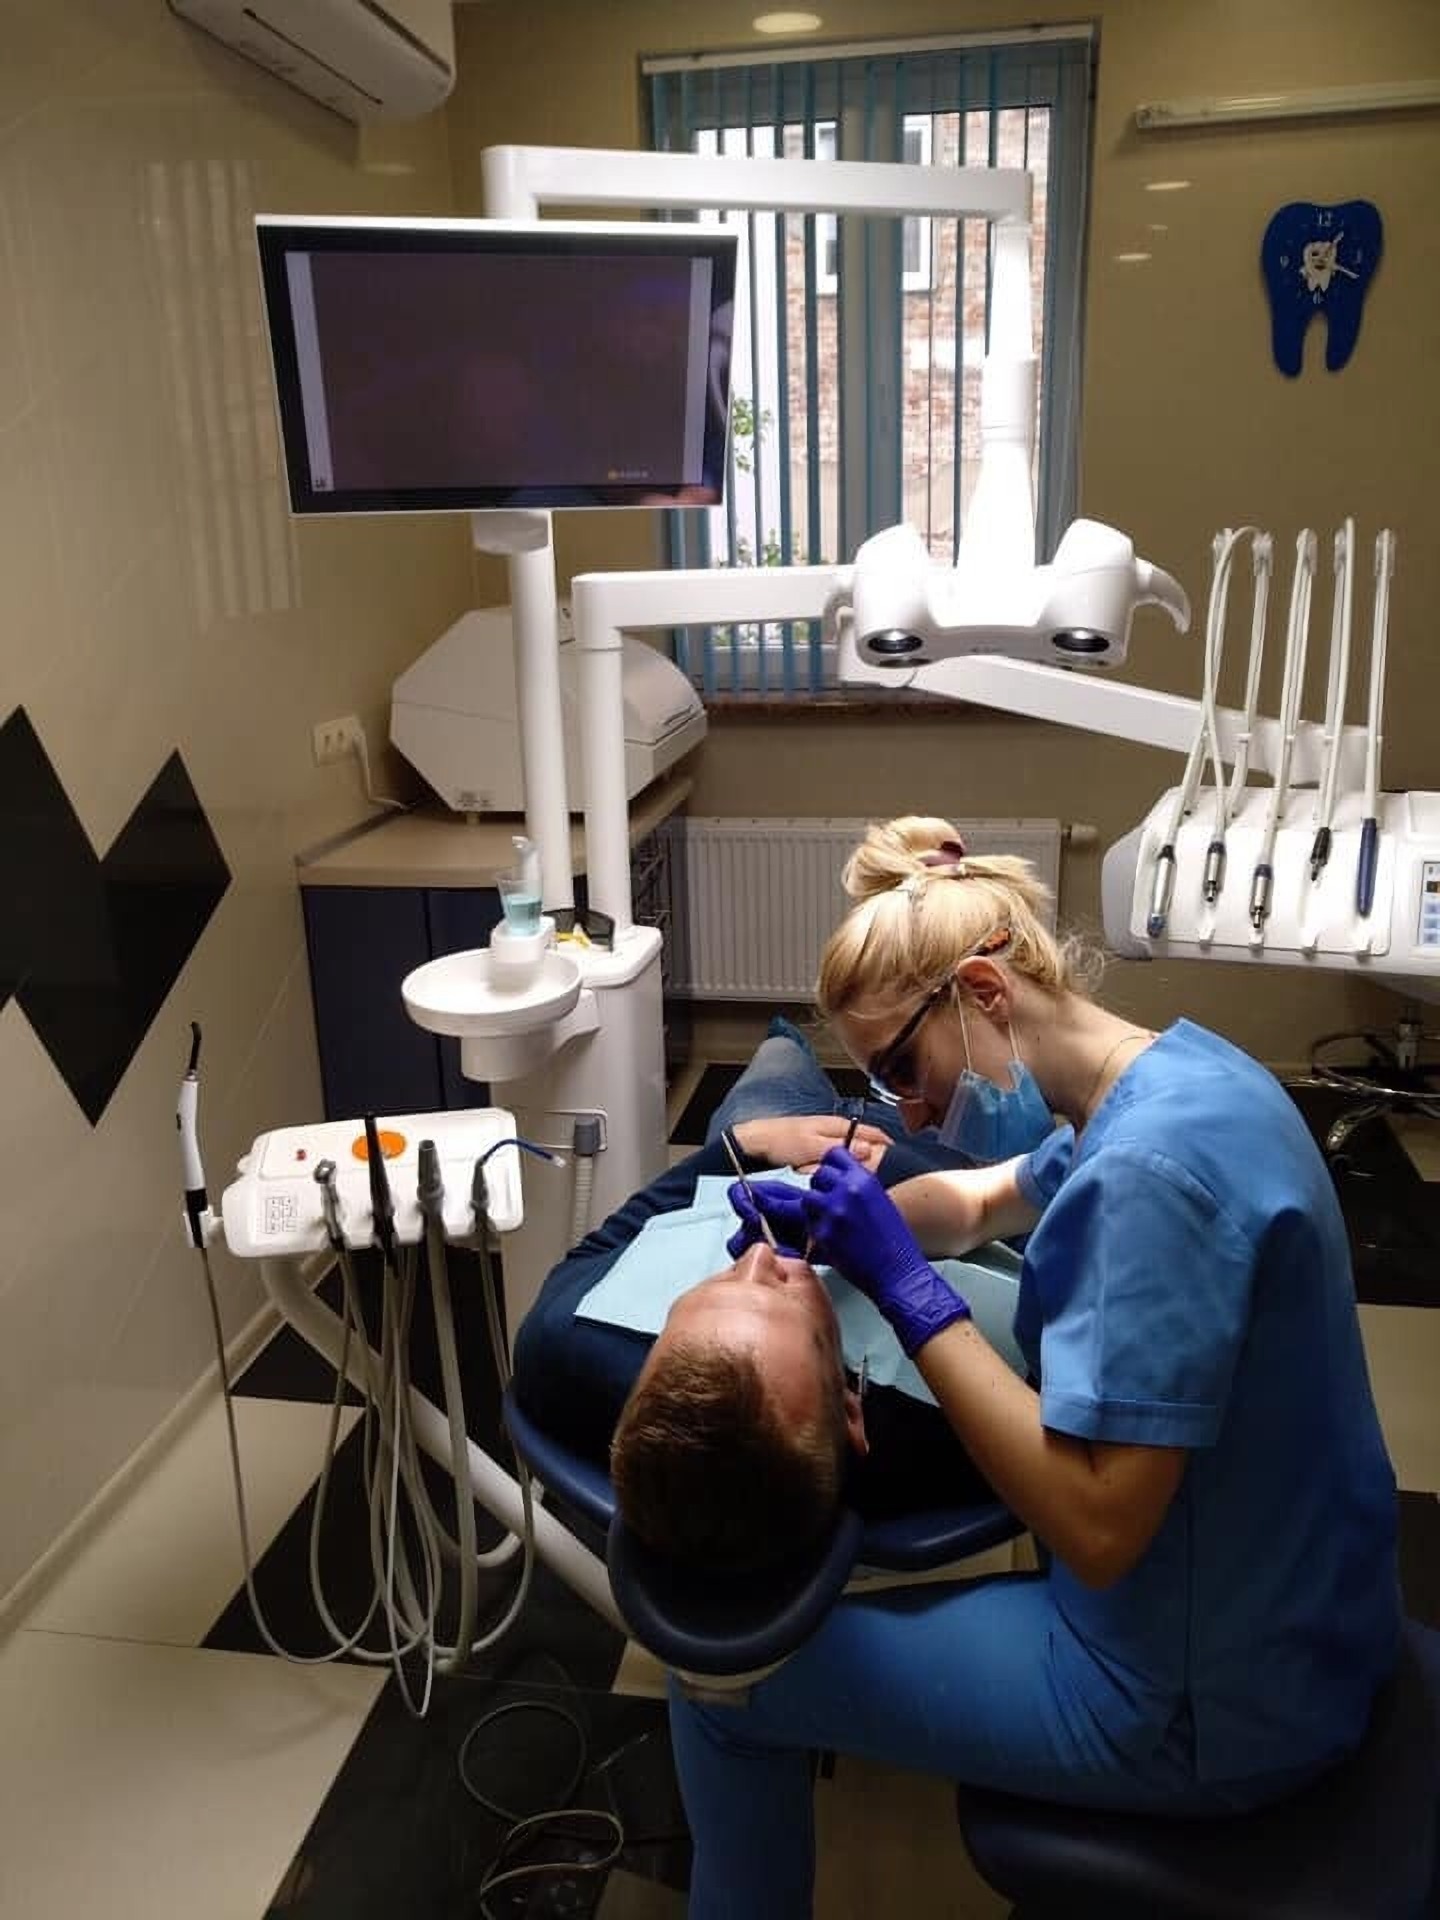 Dental treatment in the Parodent Clinic in Lviv